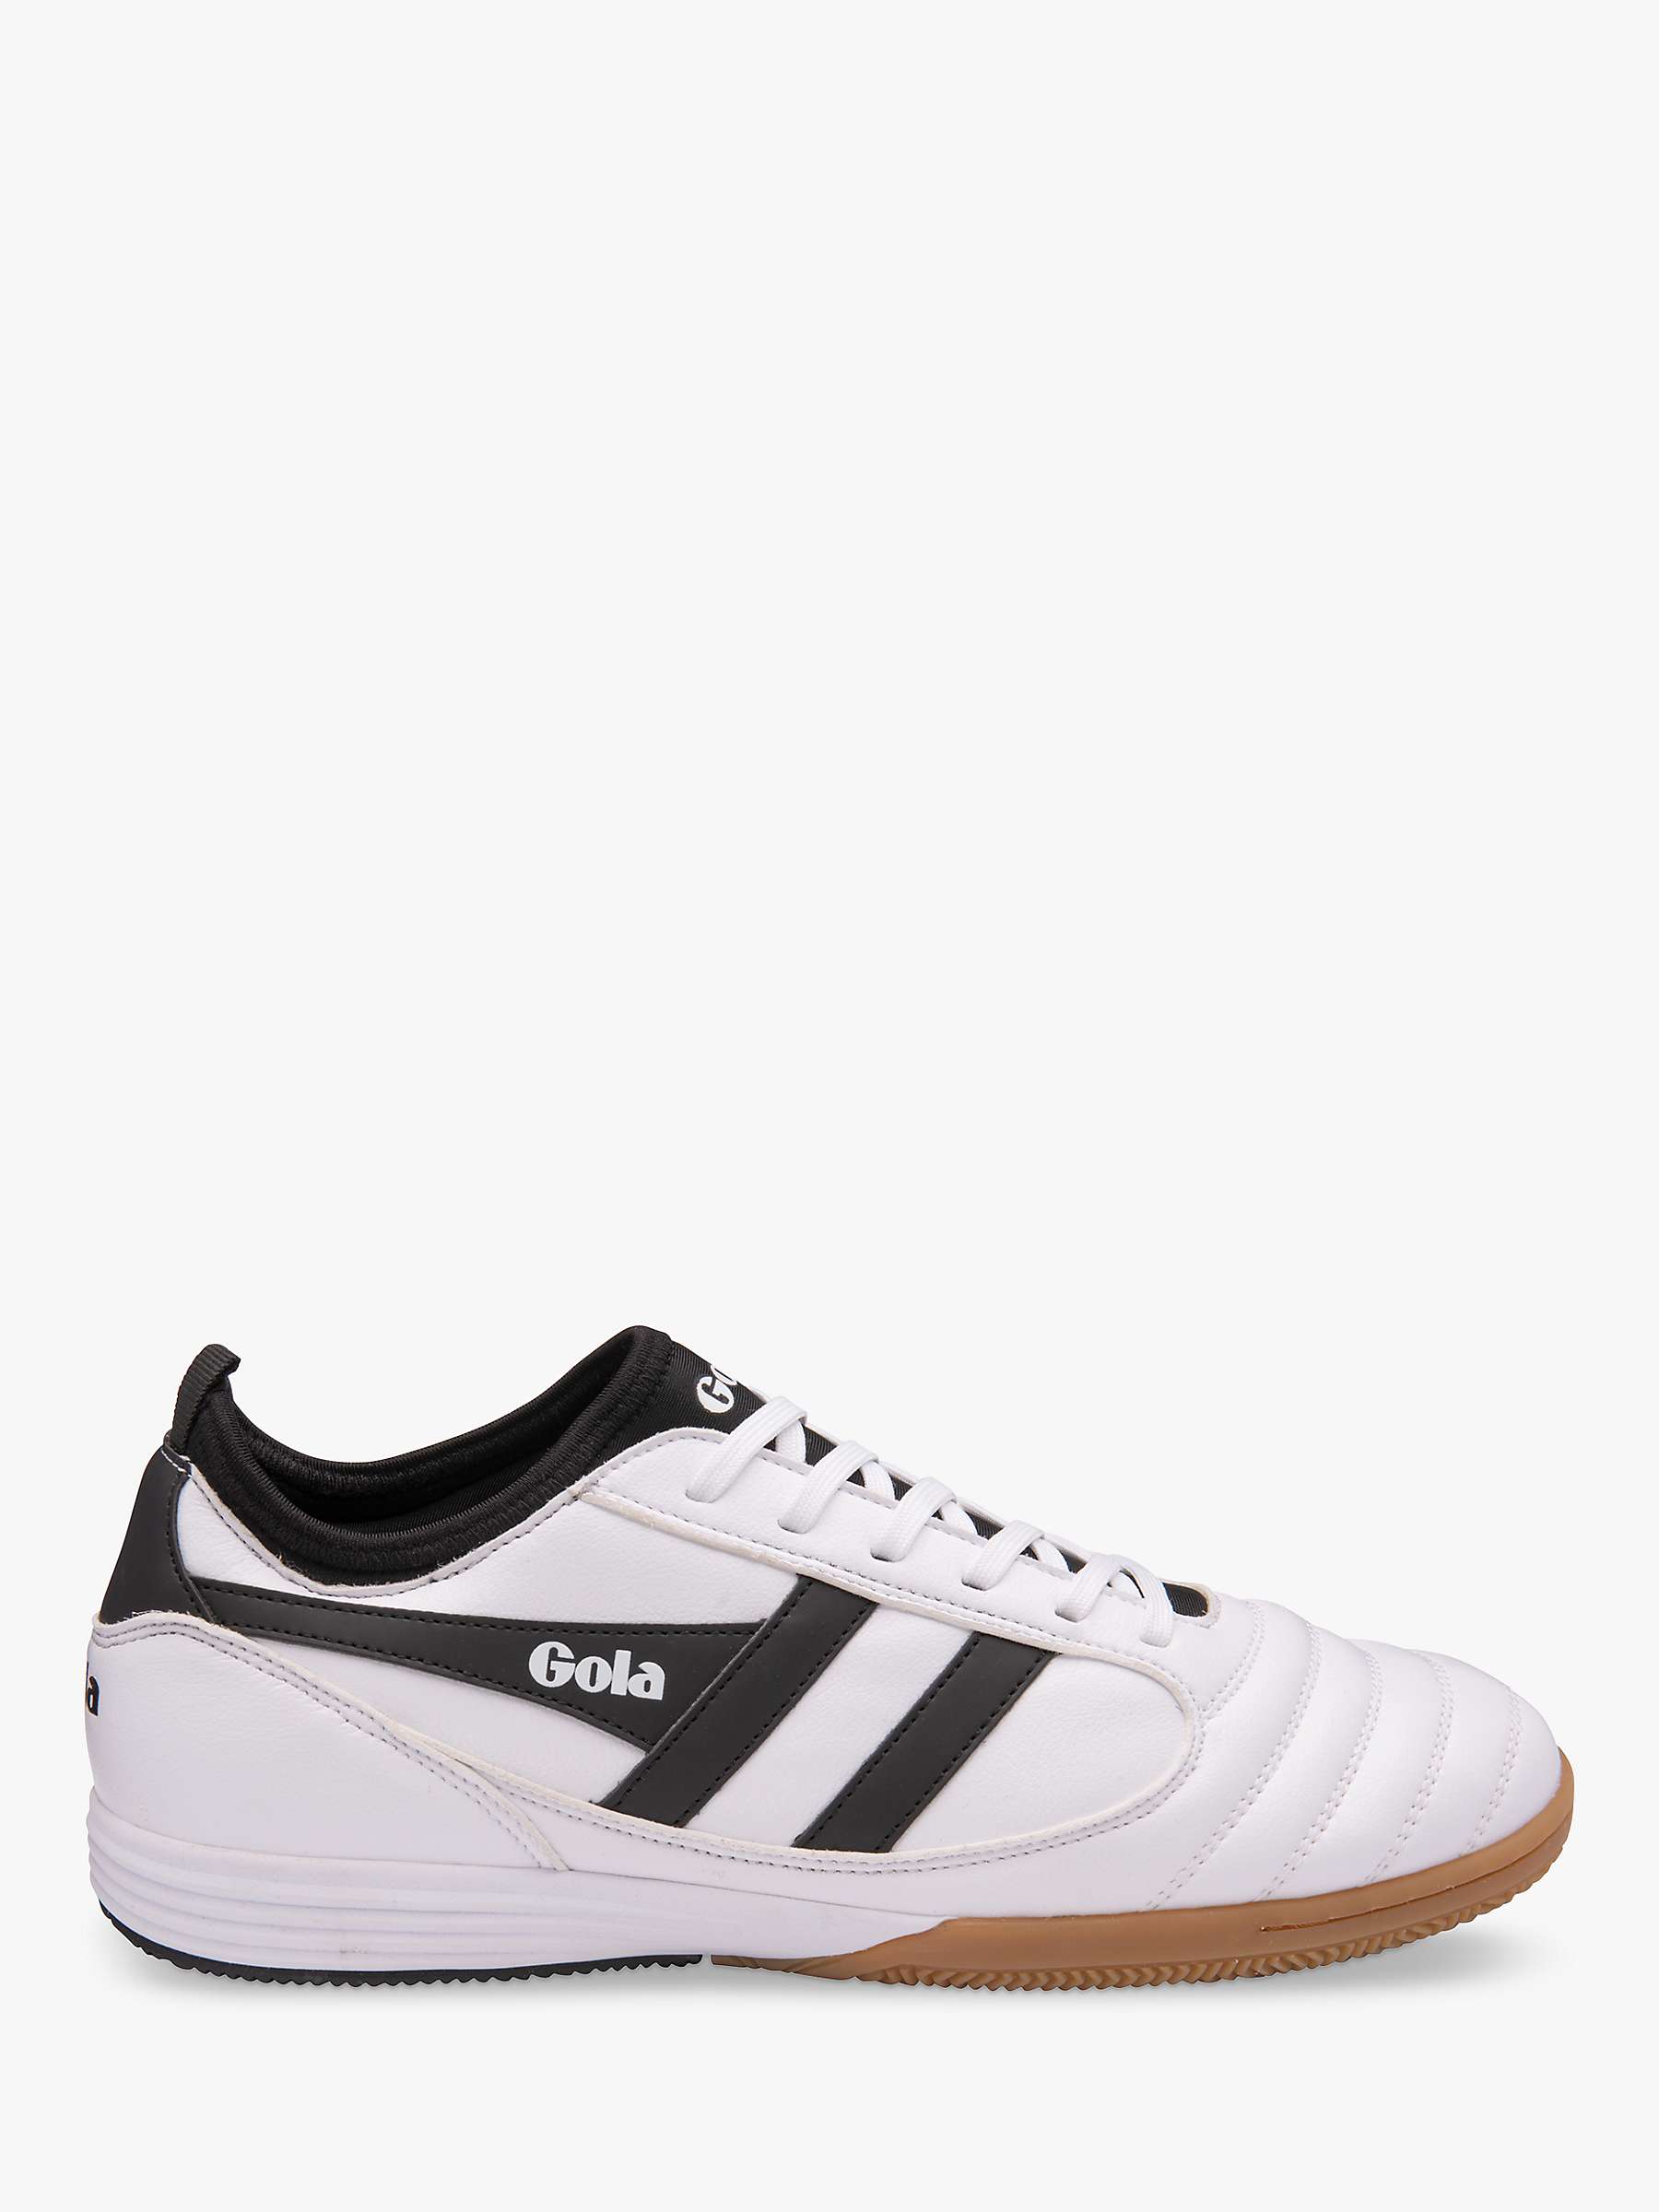 Buy Gola Performance Ceptor TX Football Trainers, White/Black Online at johnlewis.com